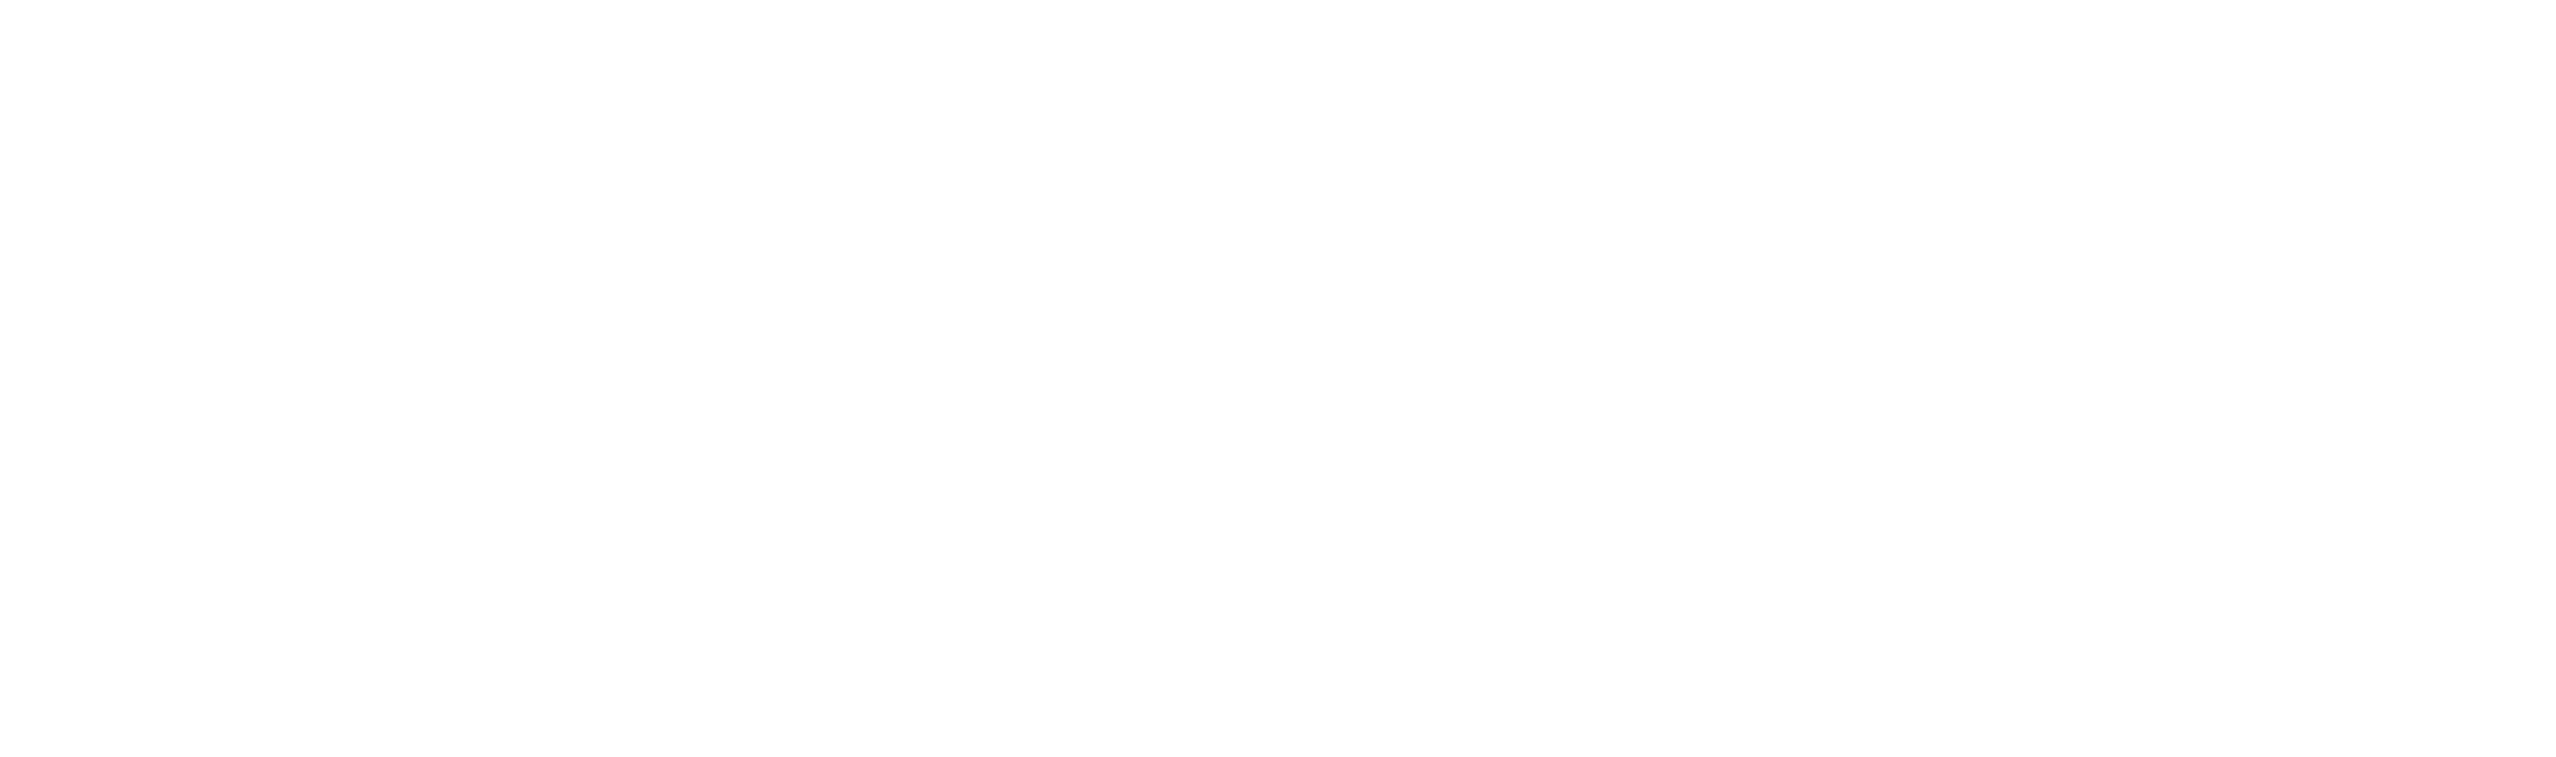 endless events full transparent white-1